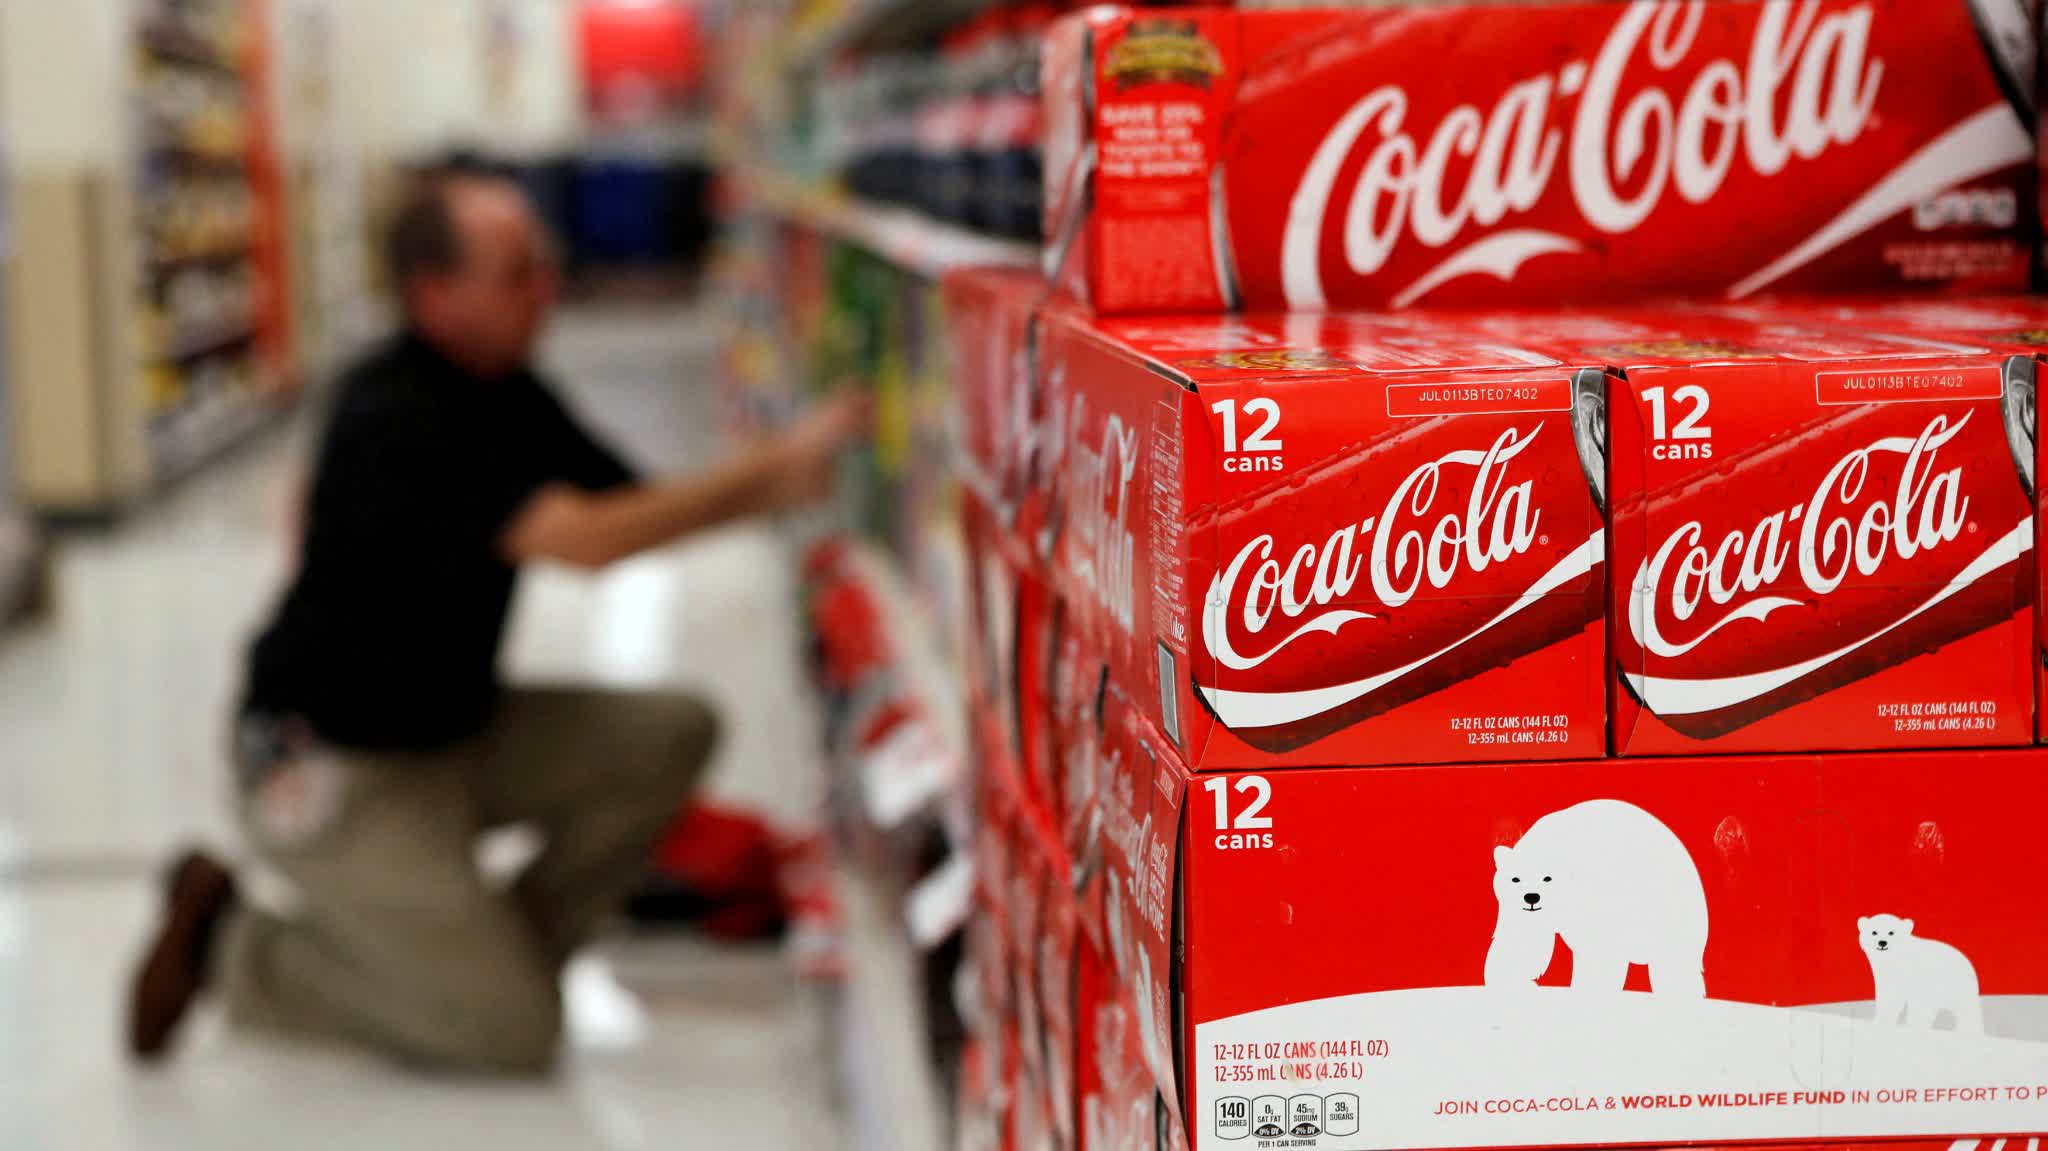 Research shows Coca-Cola world's largest producer of branded plastic pollution